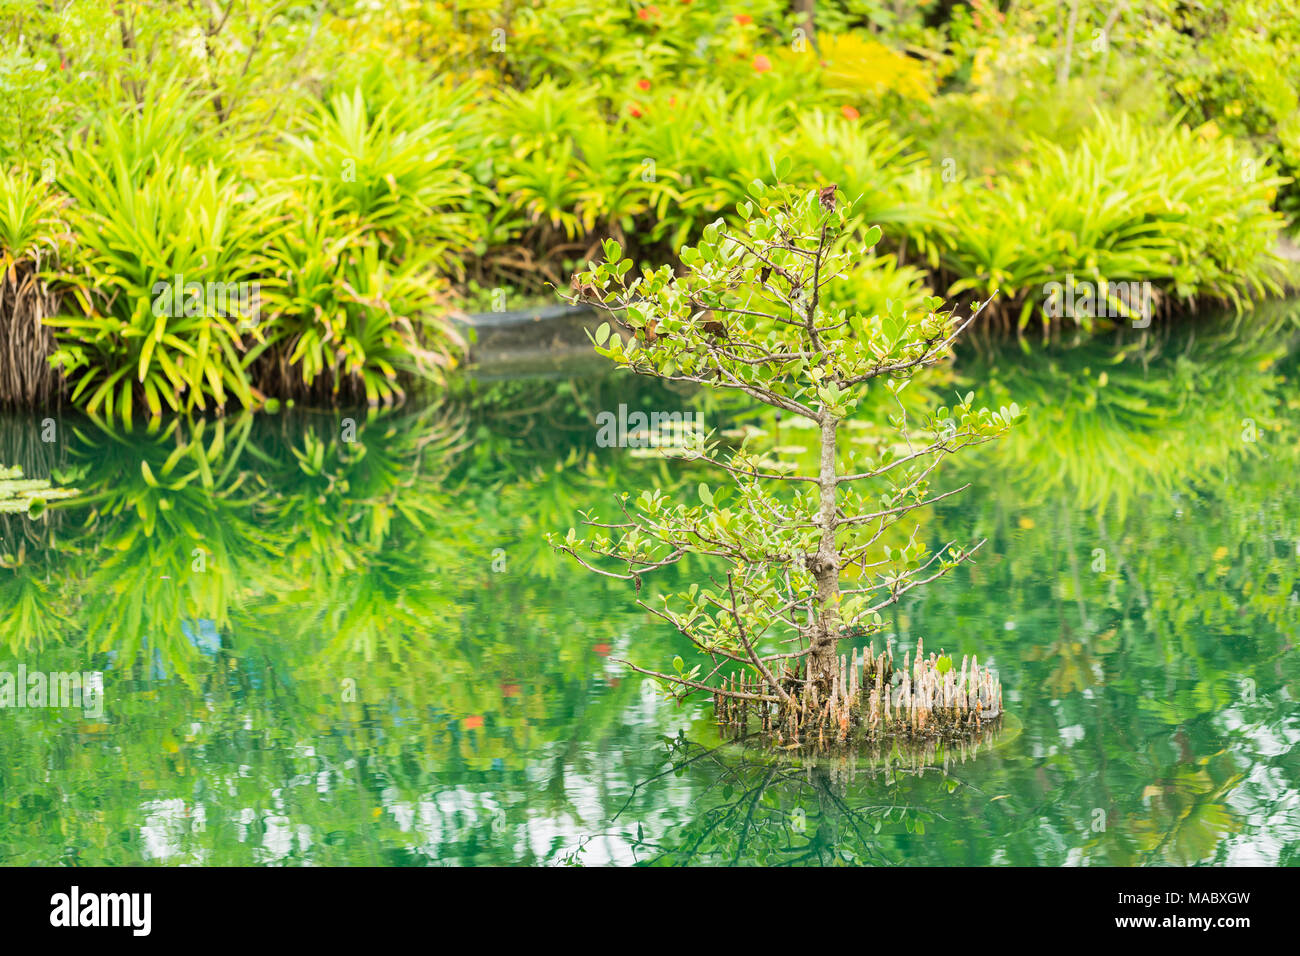 mangrove in the green Pond Stock Photo